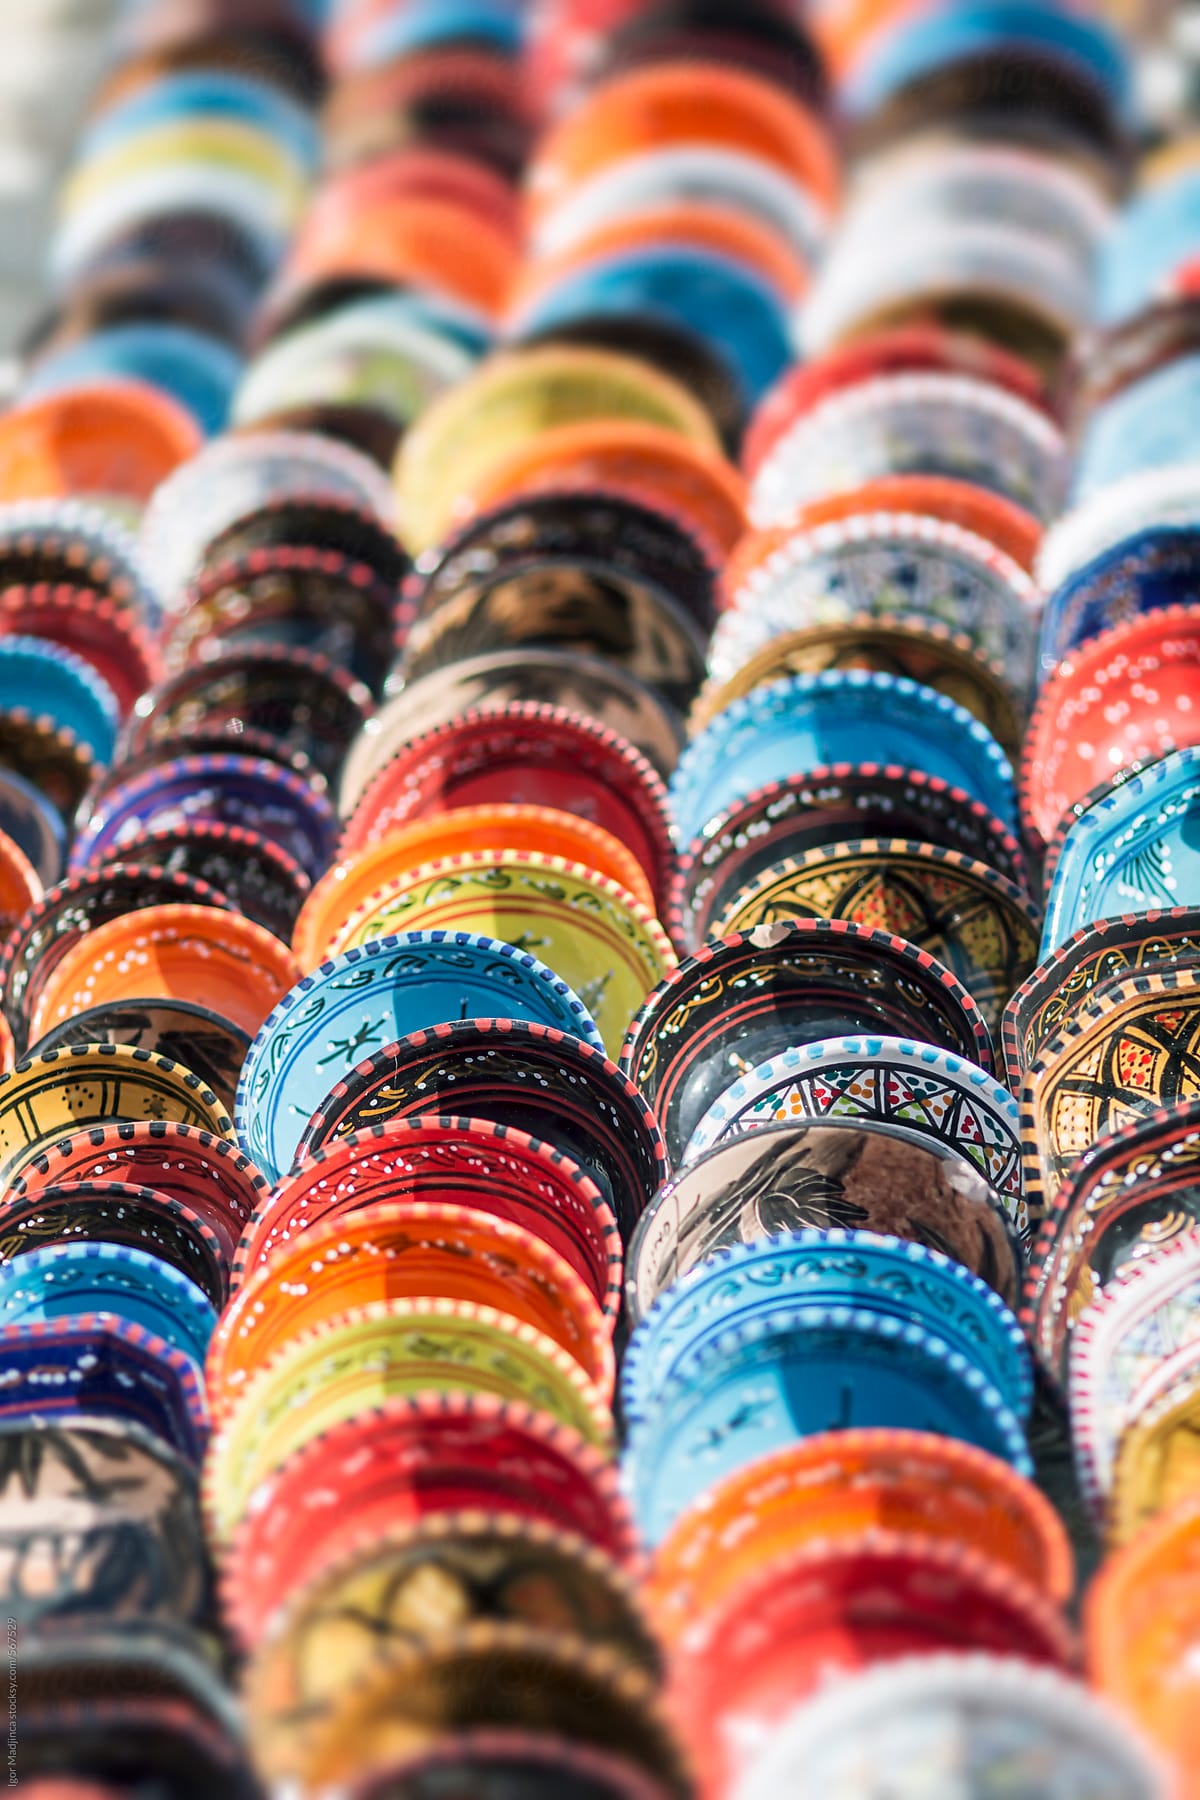 colorful decorative plates on the Arab market